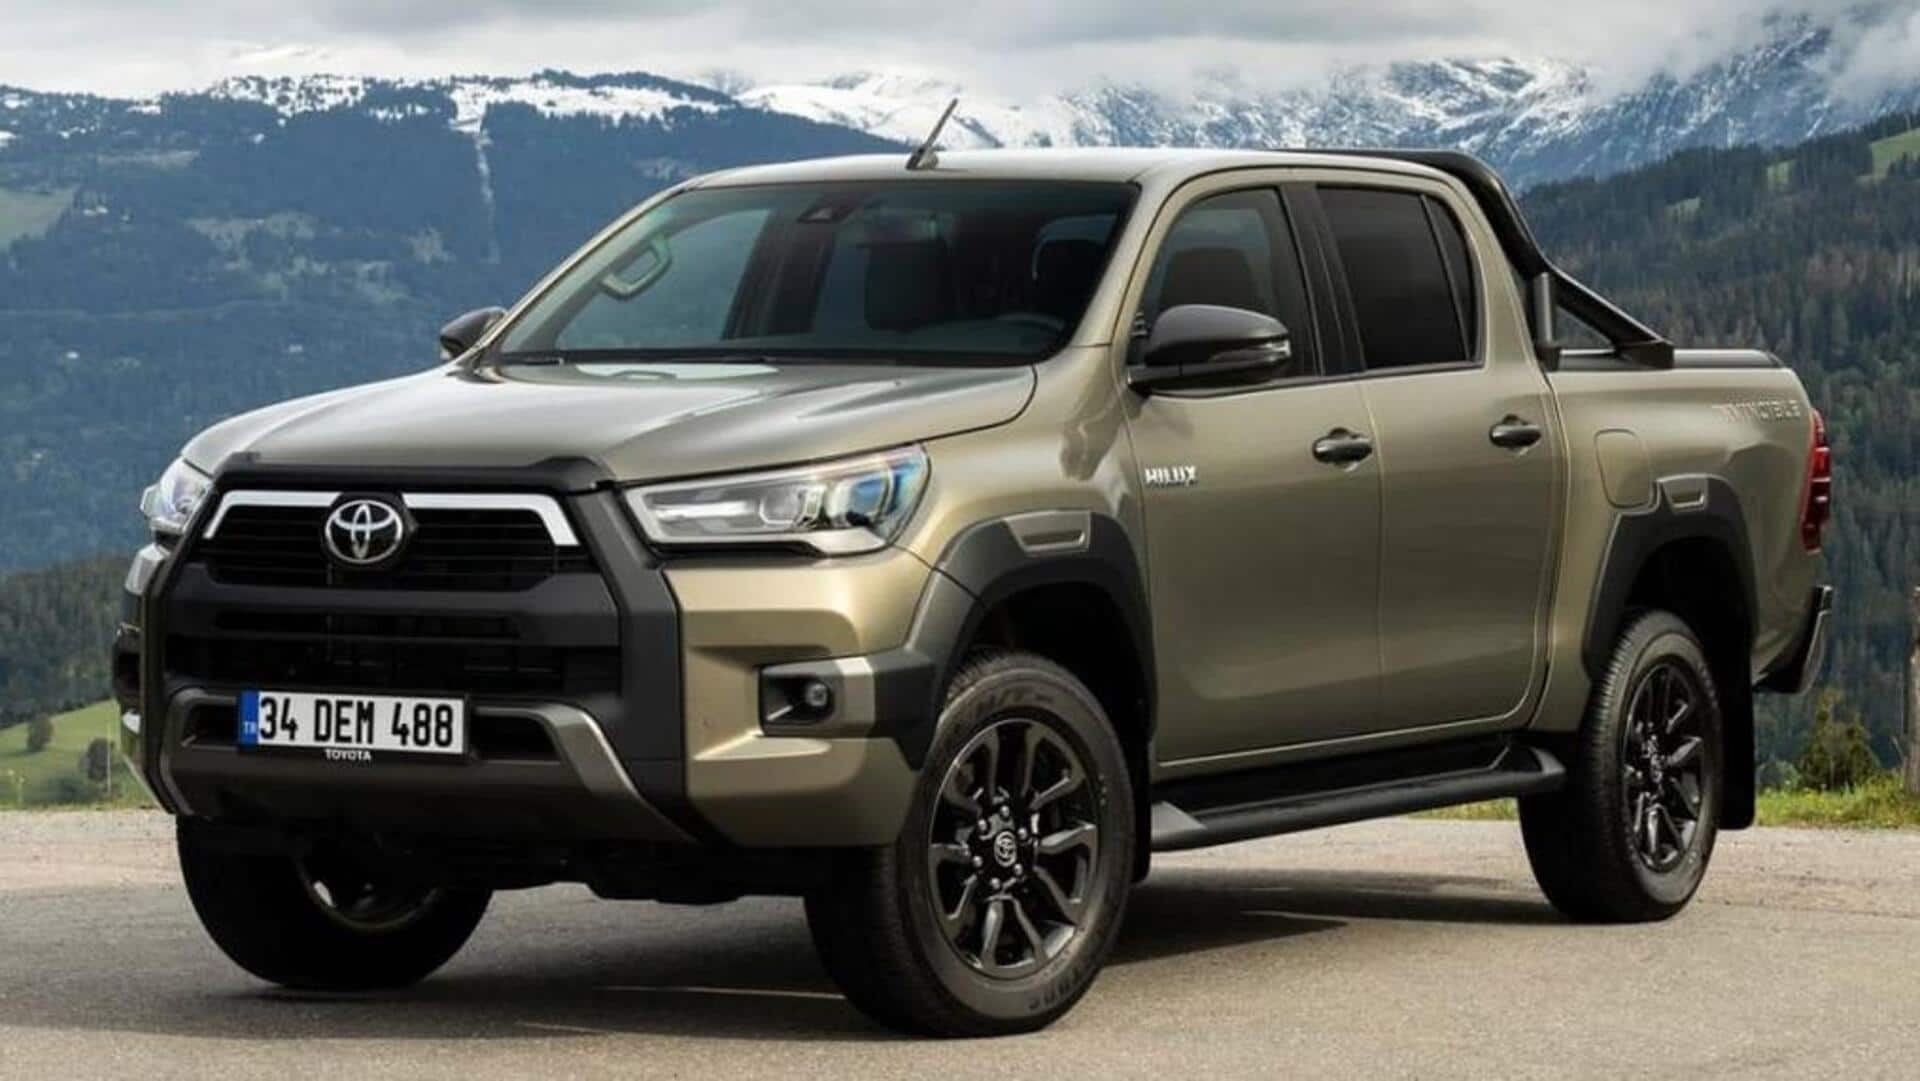 Toyota Hilux pickup truck introduced with mild-hybrid technology: Check features